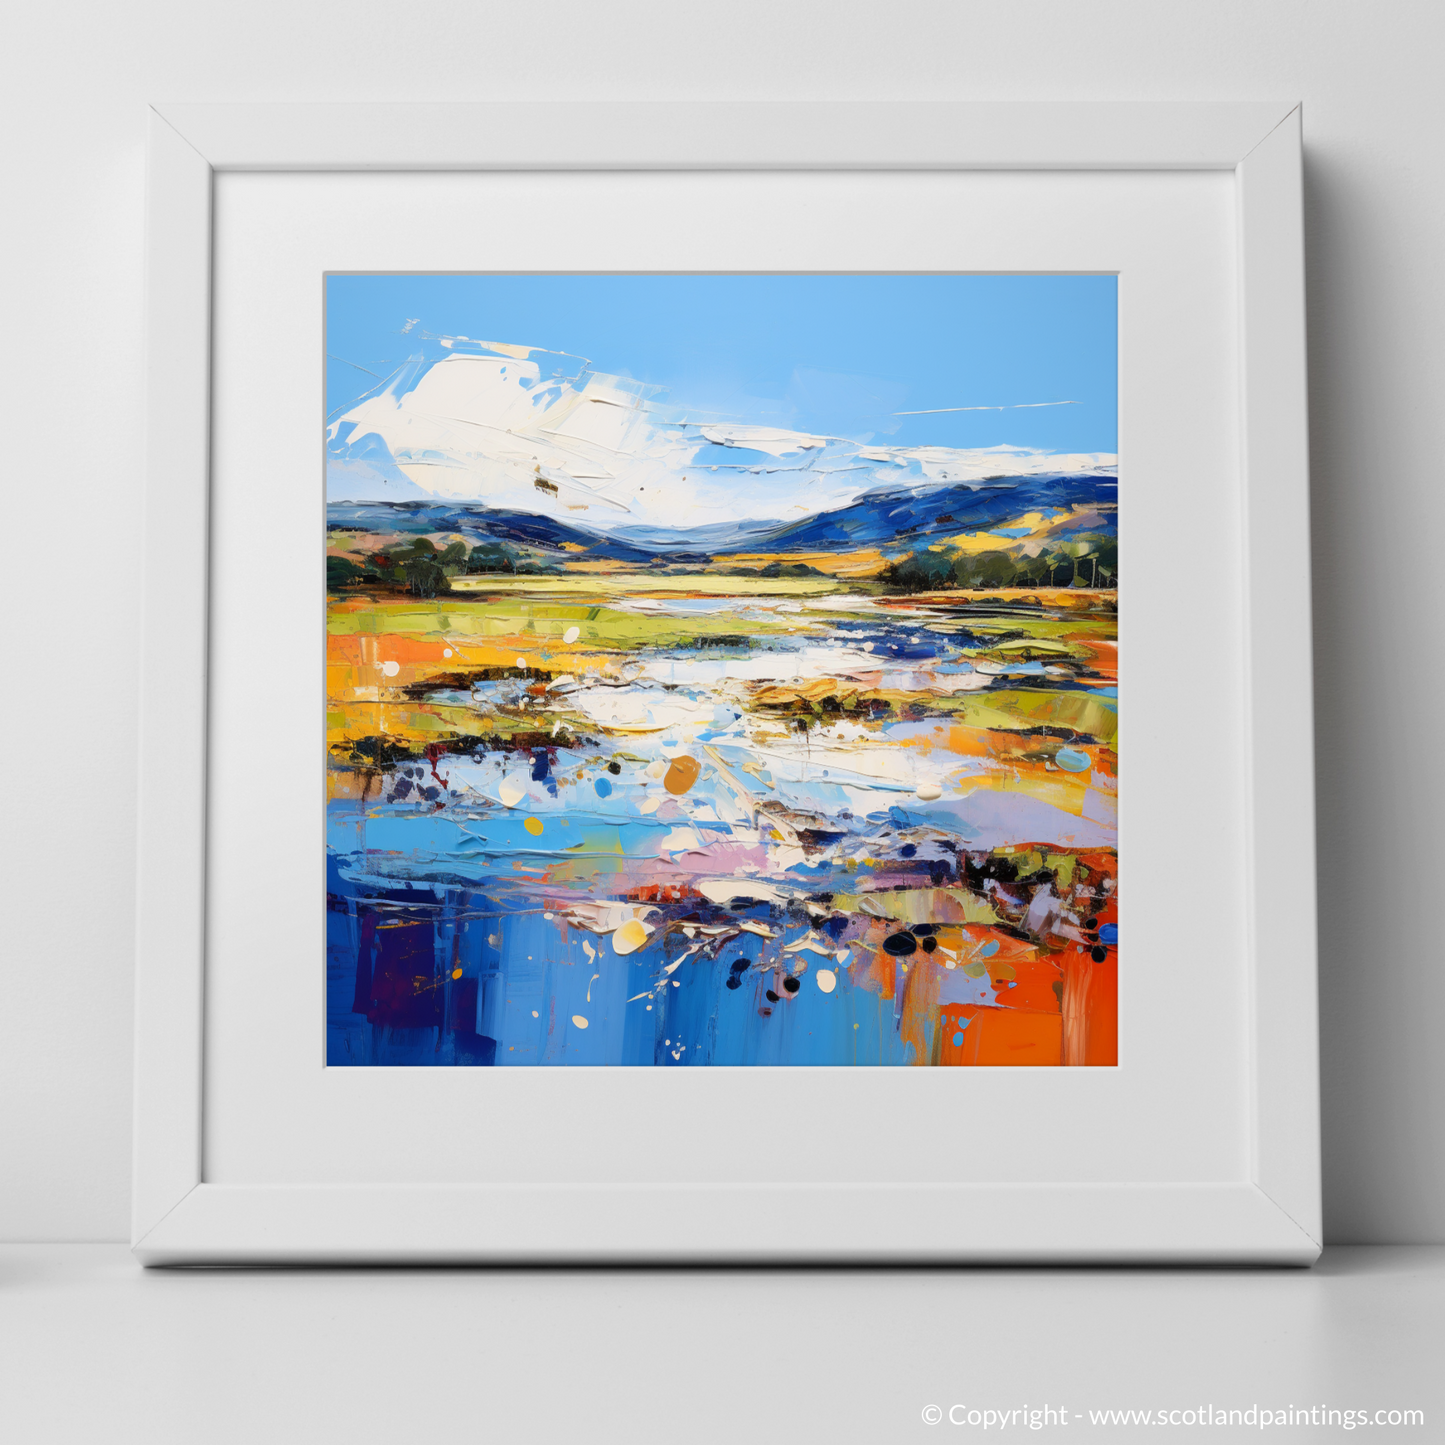 Art Print of Loch Doon, Ayrshire in summer with a white frame